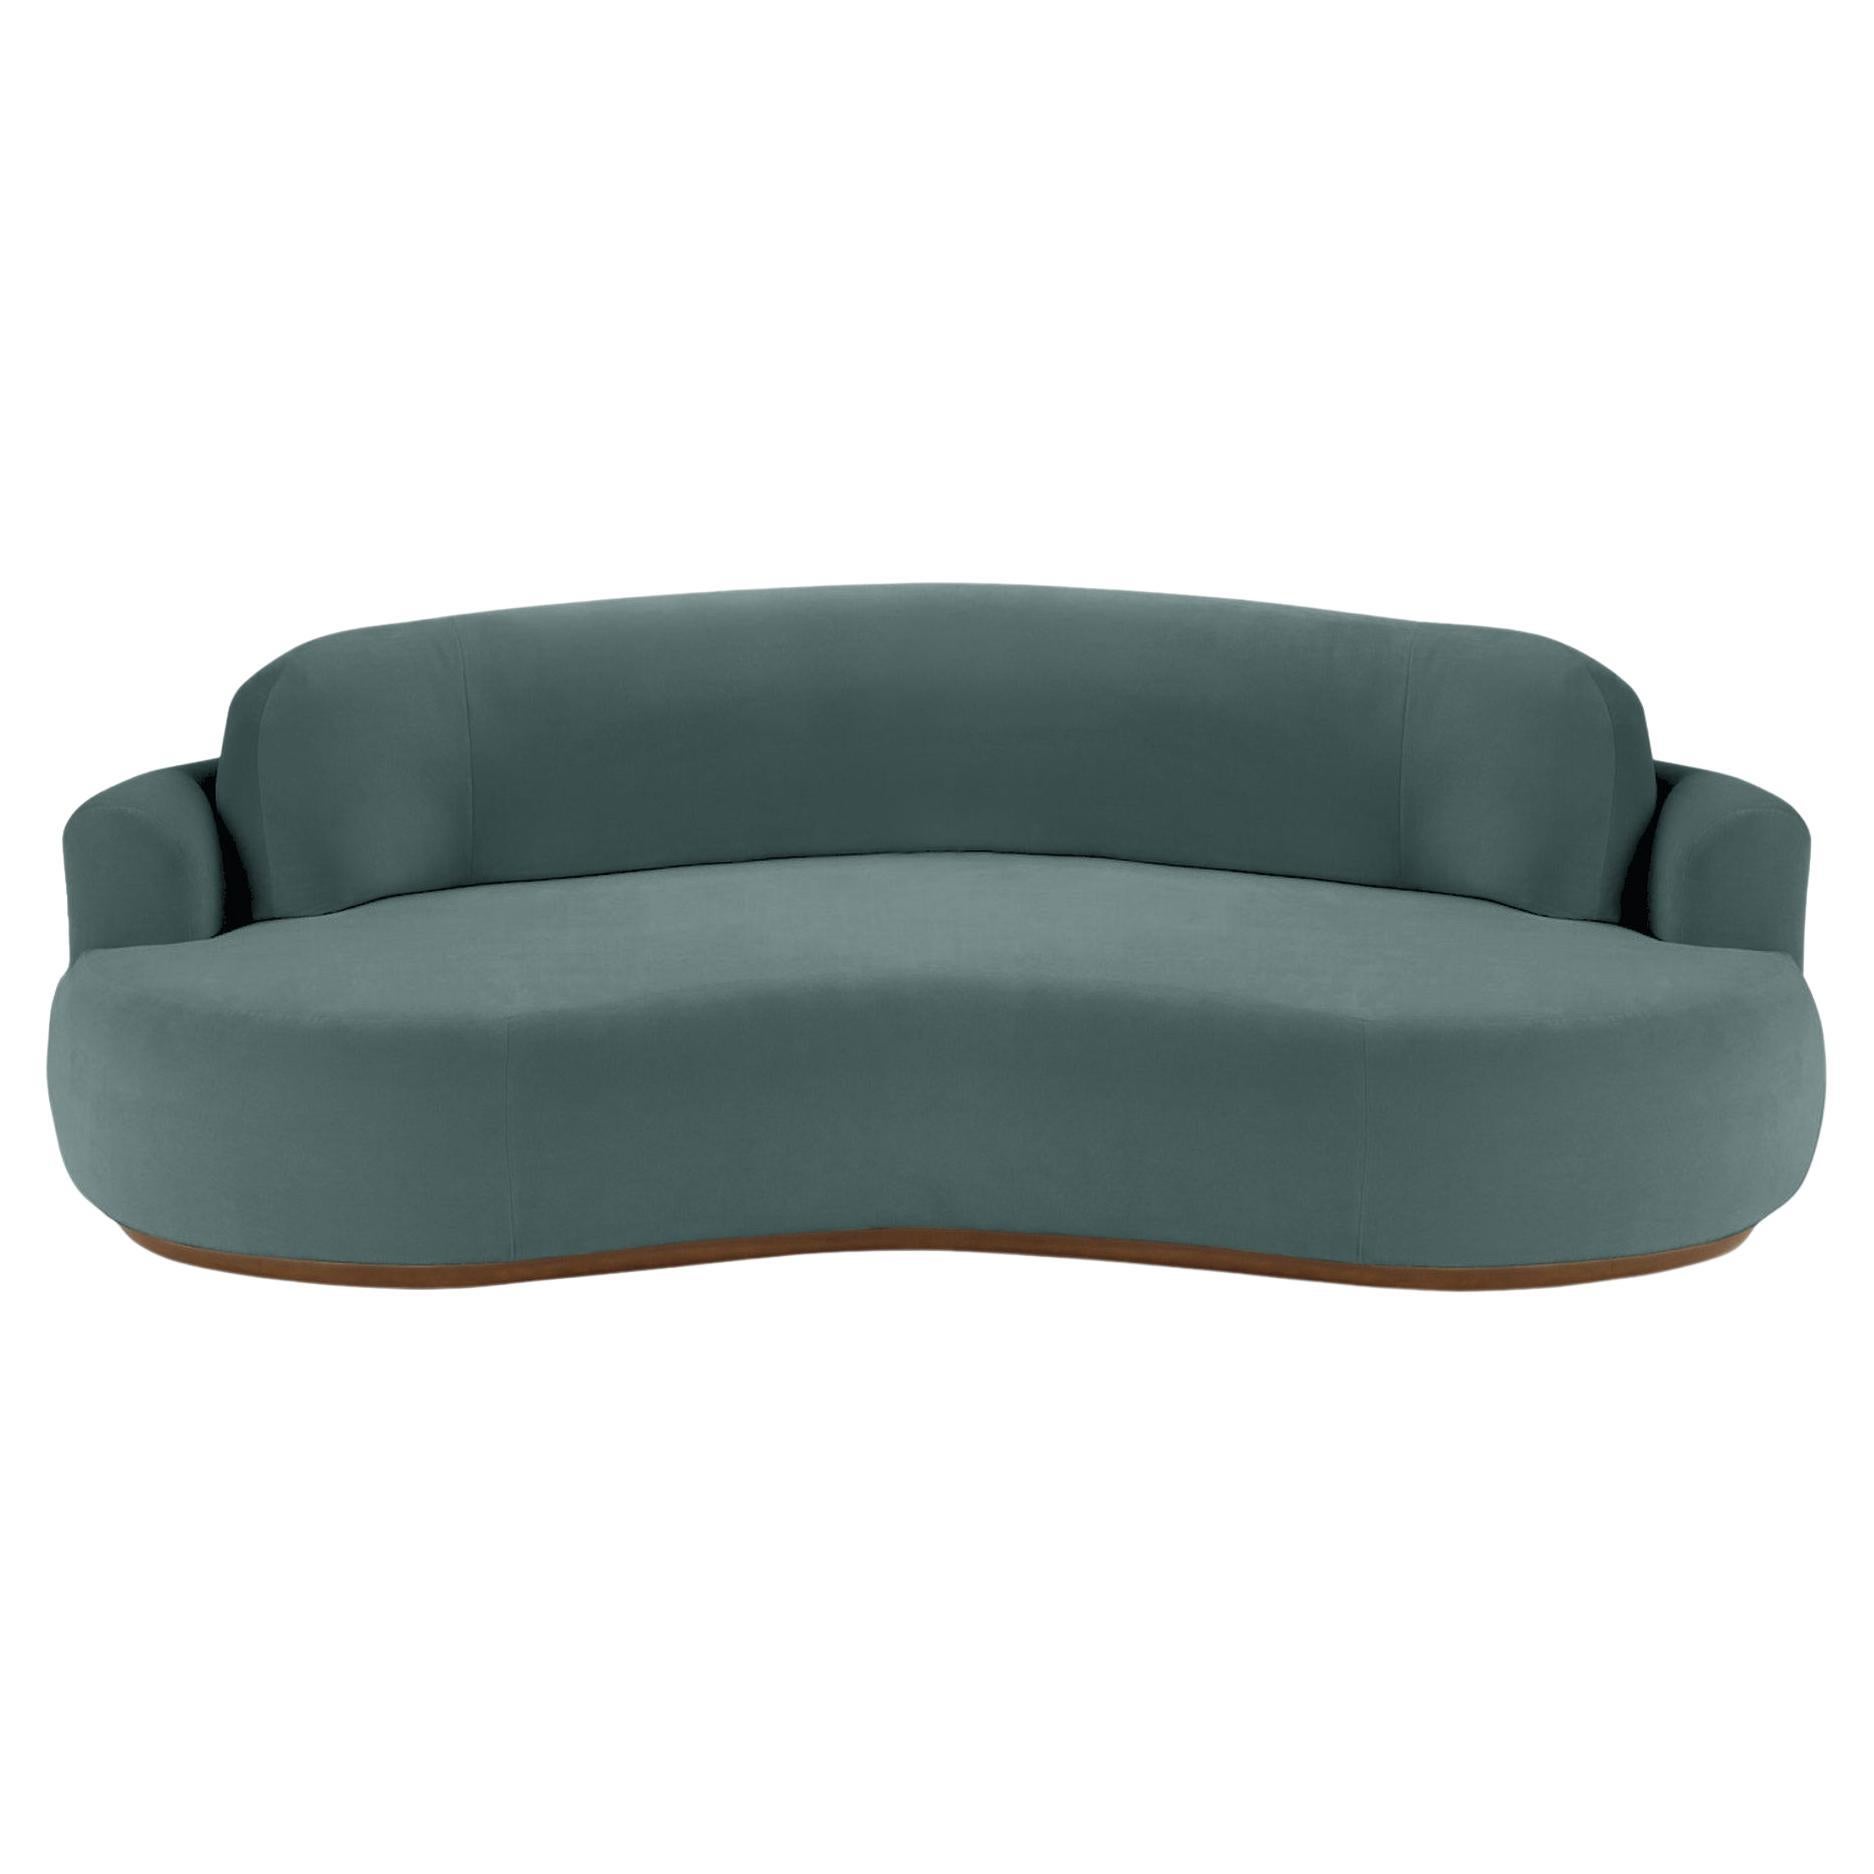 Naked Round Sofa, Large with Beech Ash-056-1 and Teal For Sale